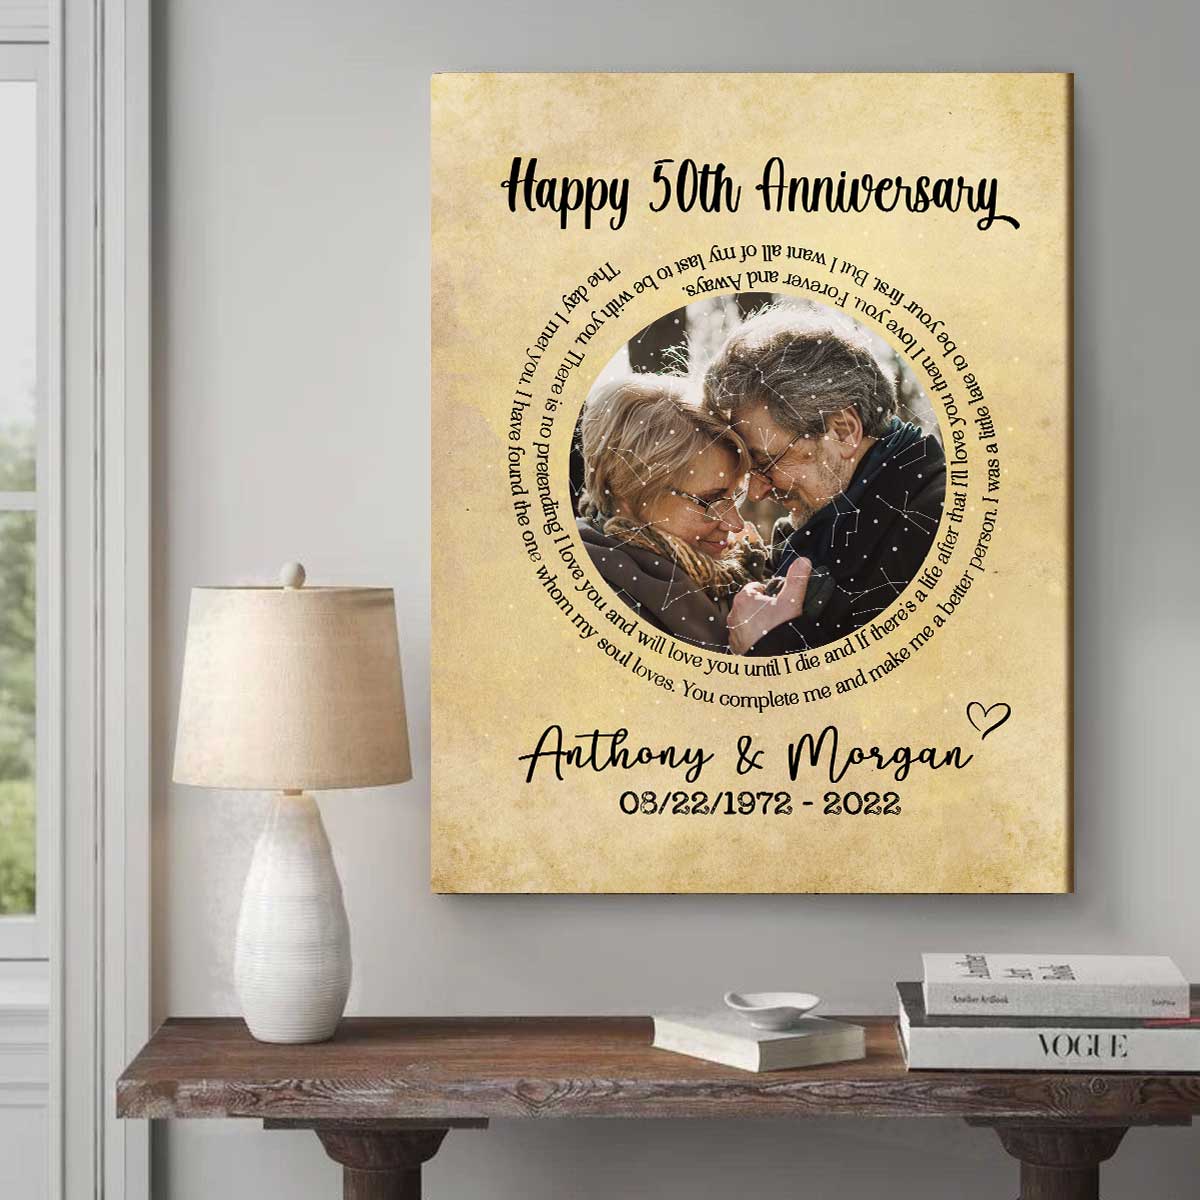 32 Meaningful Gift Ideas For Grandparents 50th Anniversary - Personal House